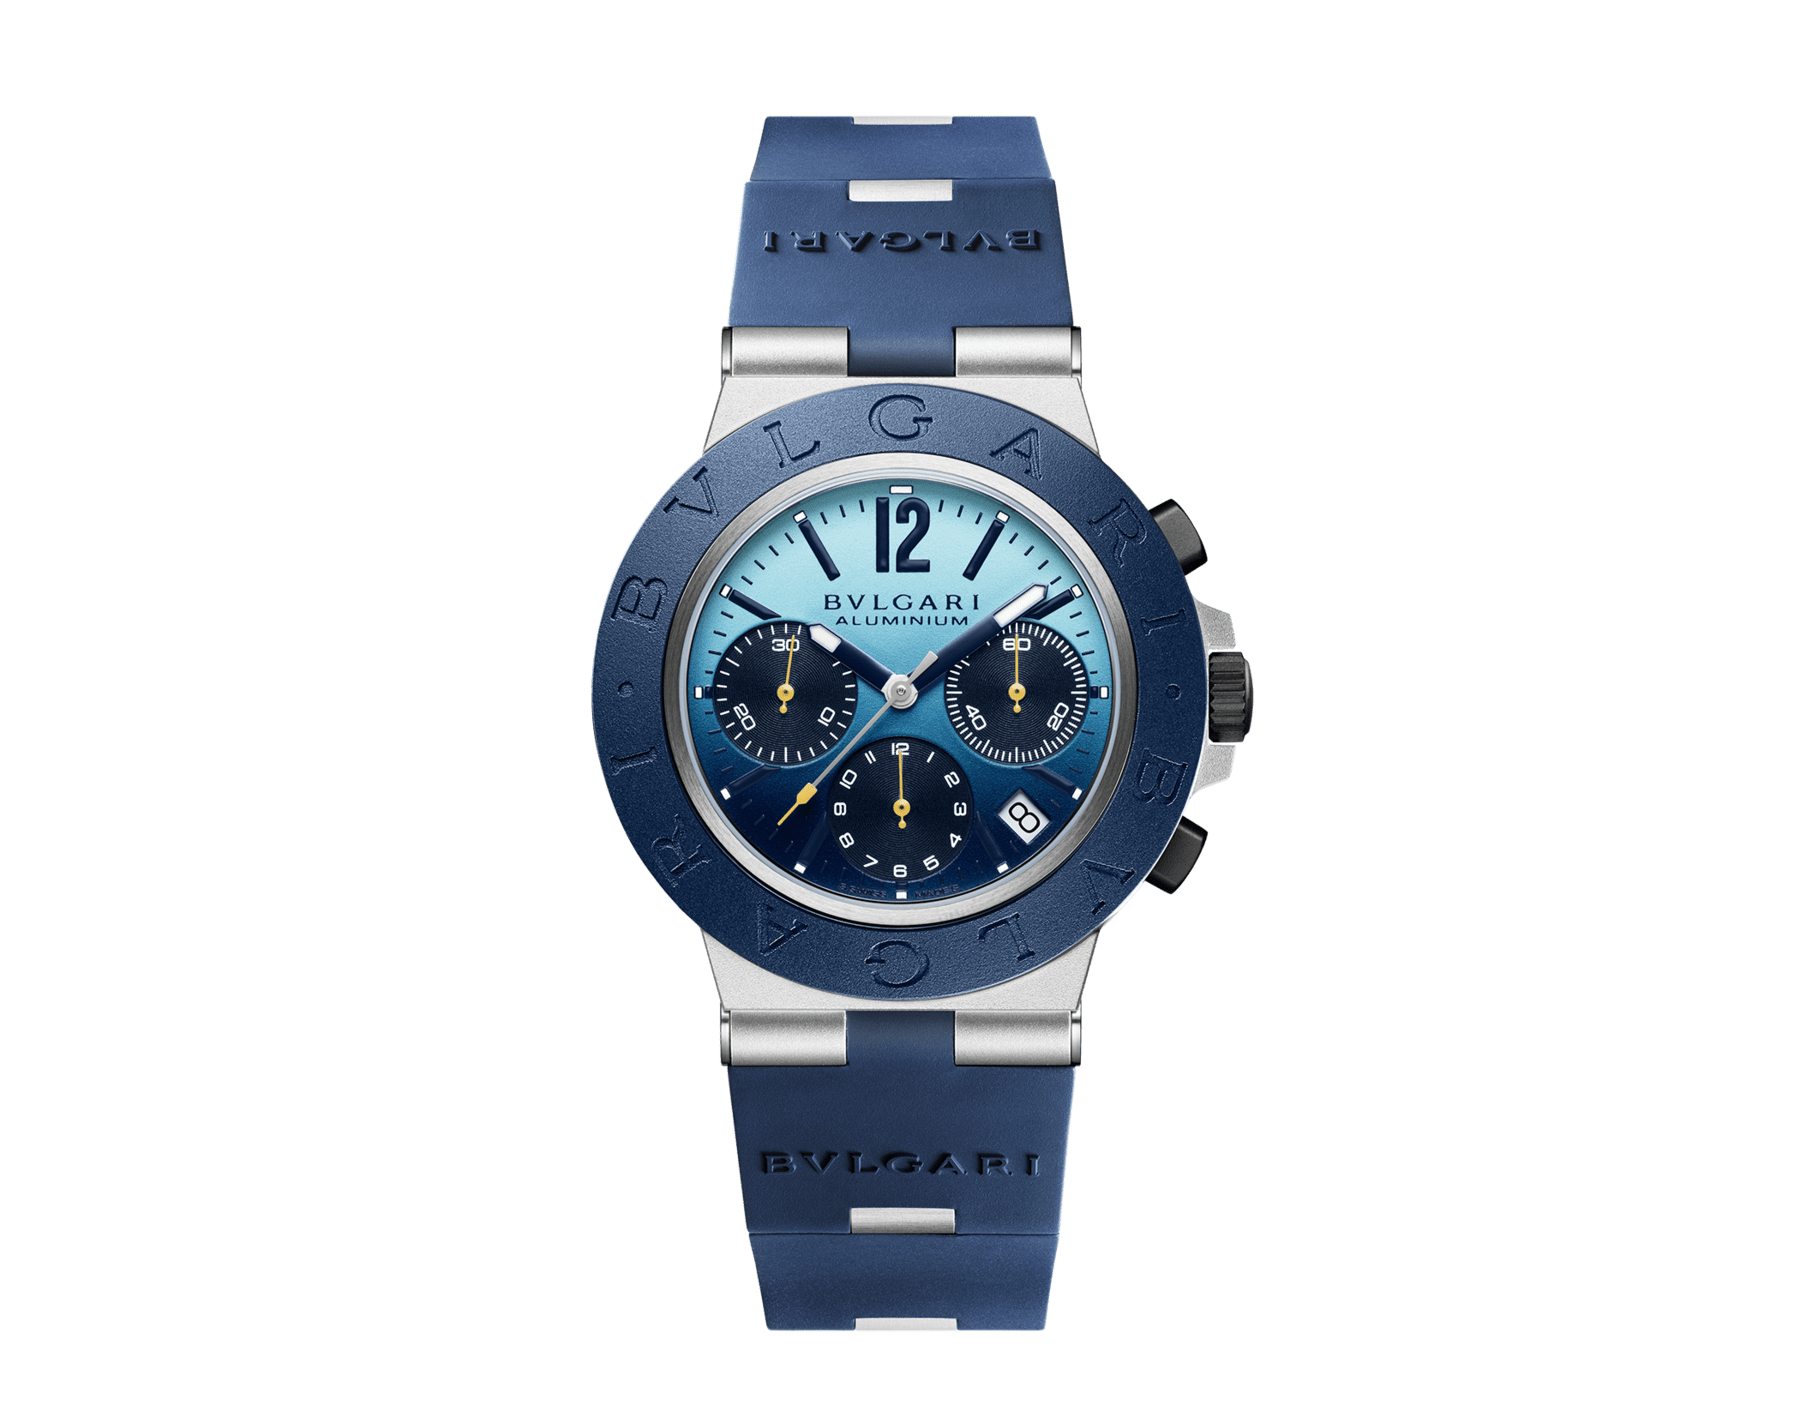 Bulgari Aluminium Capri Edition watch with mechanical manufacture movement, automatic winding, chronograph, 40 mm aluminum case, dark blue rubber bezel and bracelet, and blue shaded dial. Water-resistant up to 100 meters. Special Edition limited to 1,000 pieces 103844 image 1